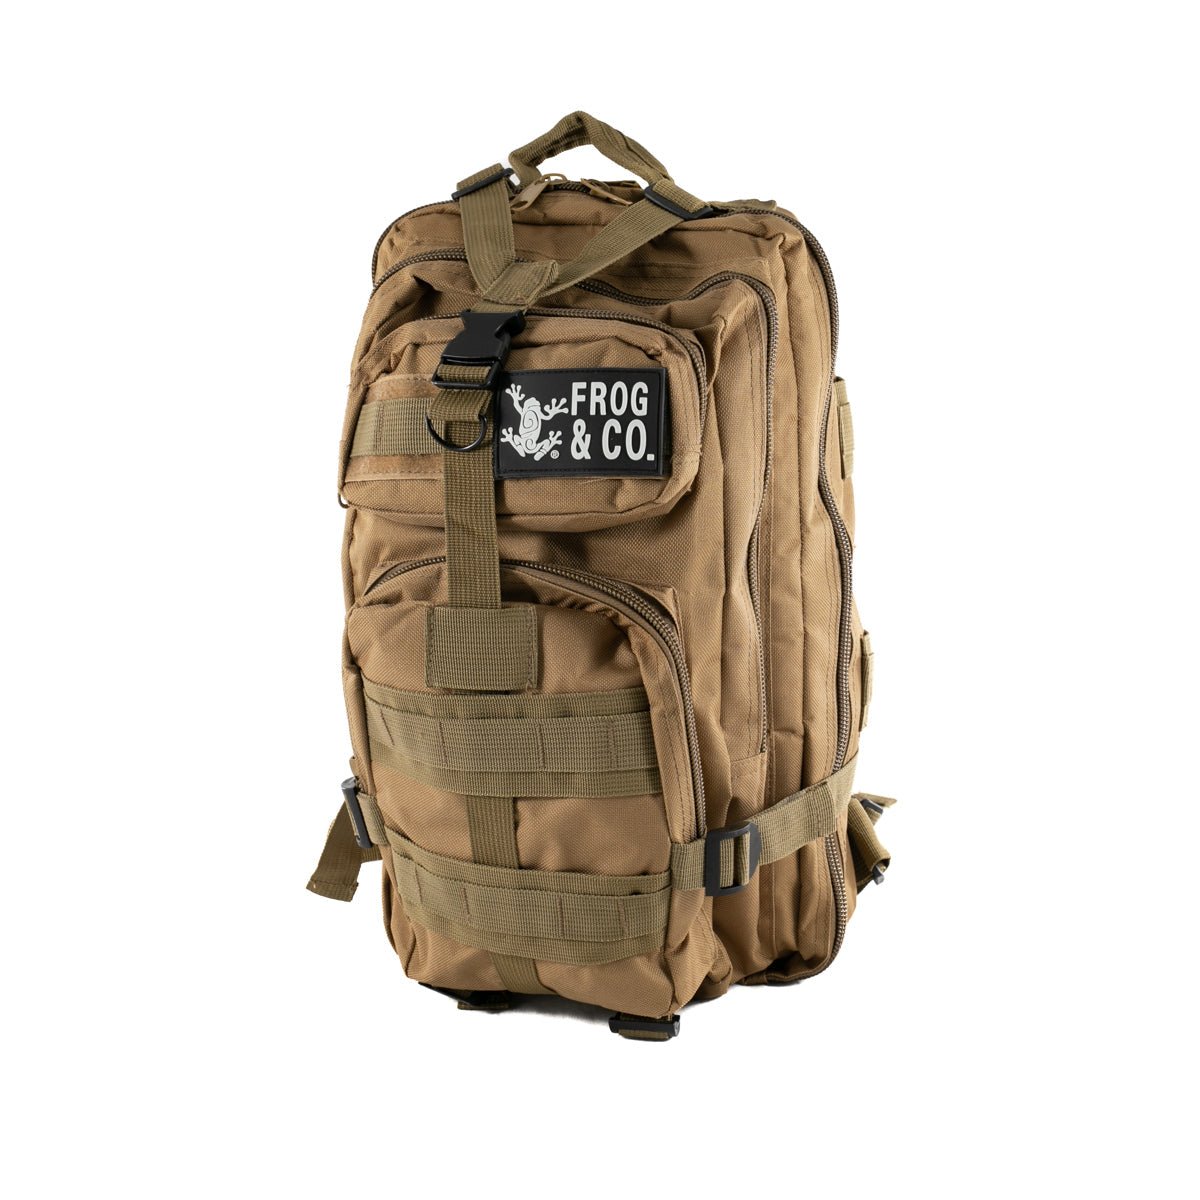 All-In-One Bug Out Bag - Tan - Groove Rabbit